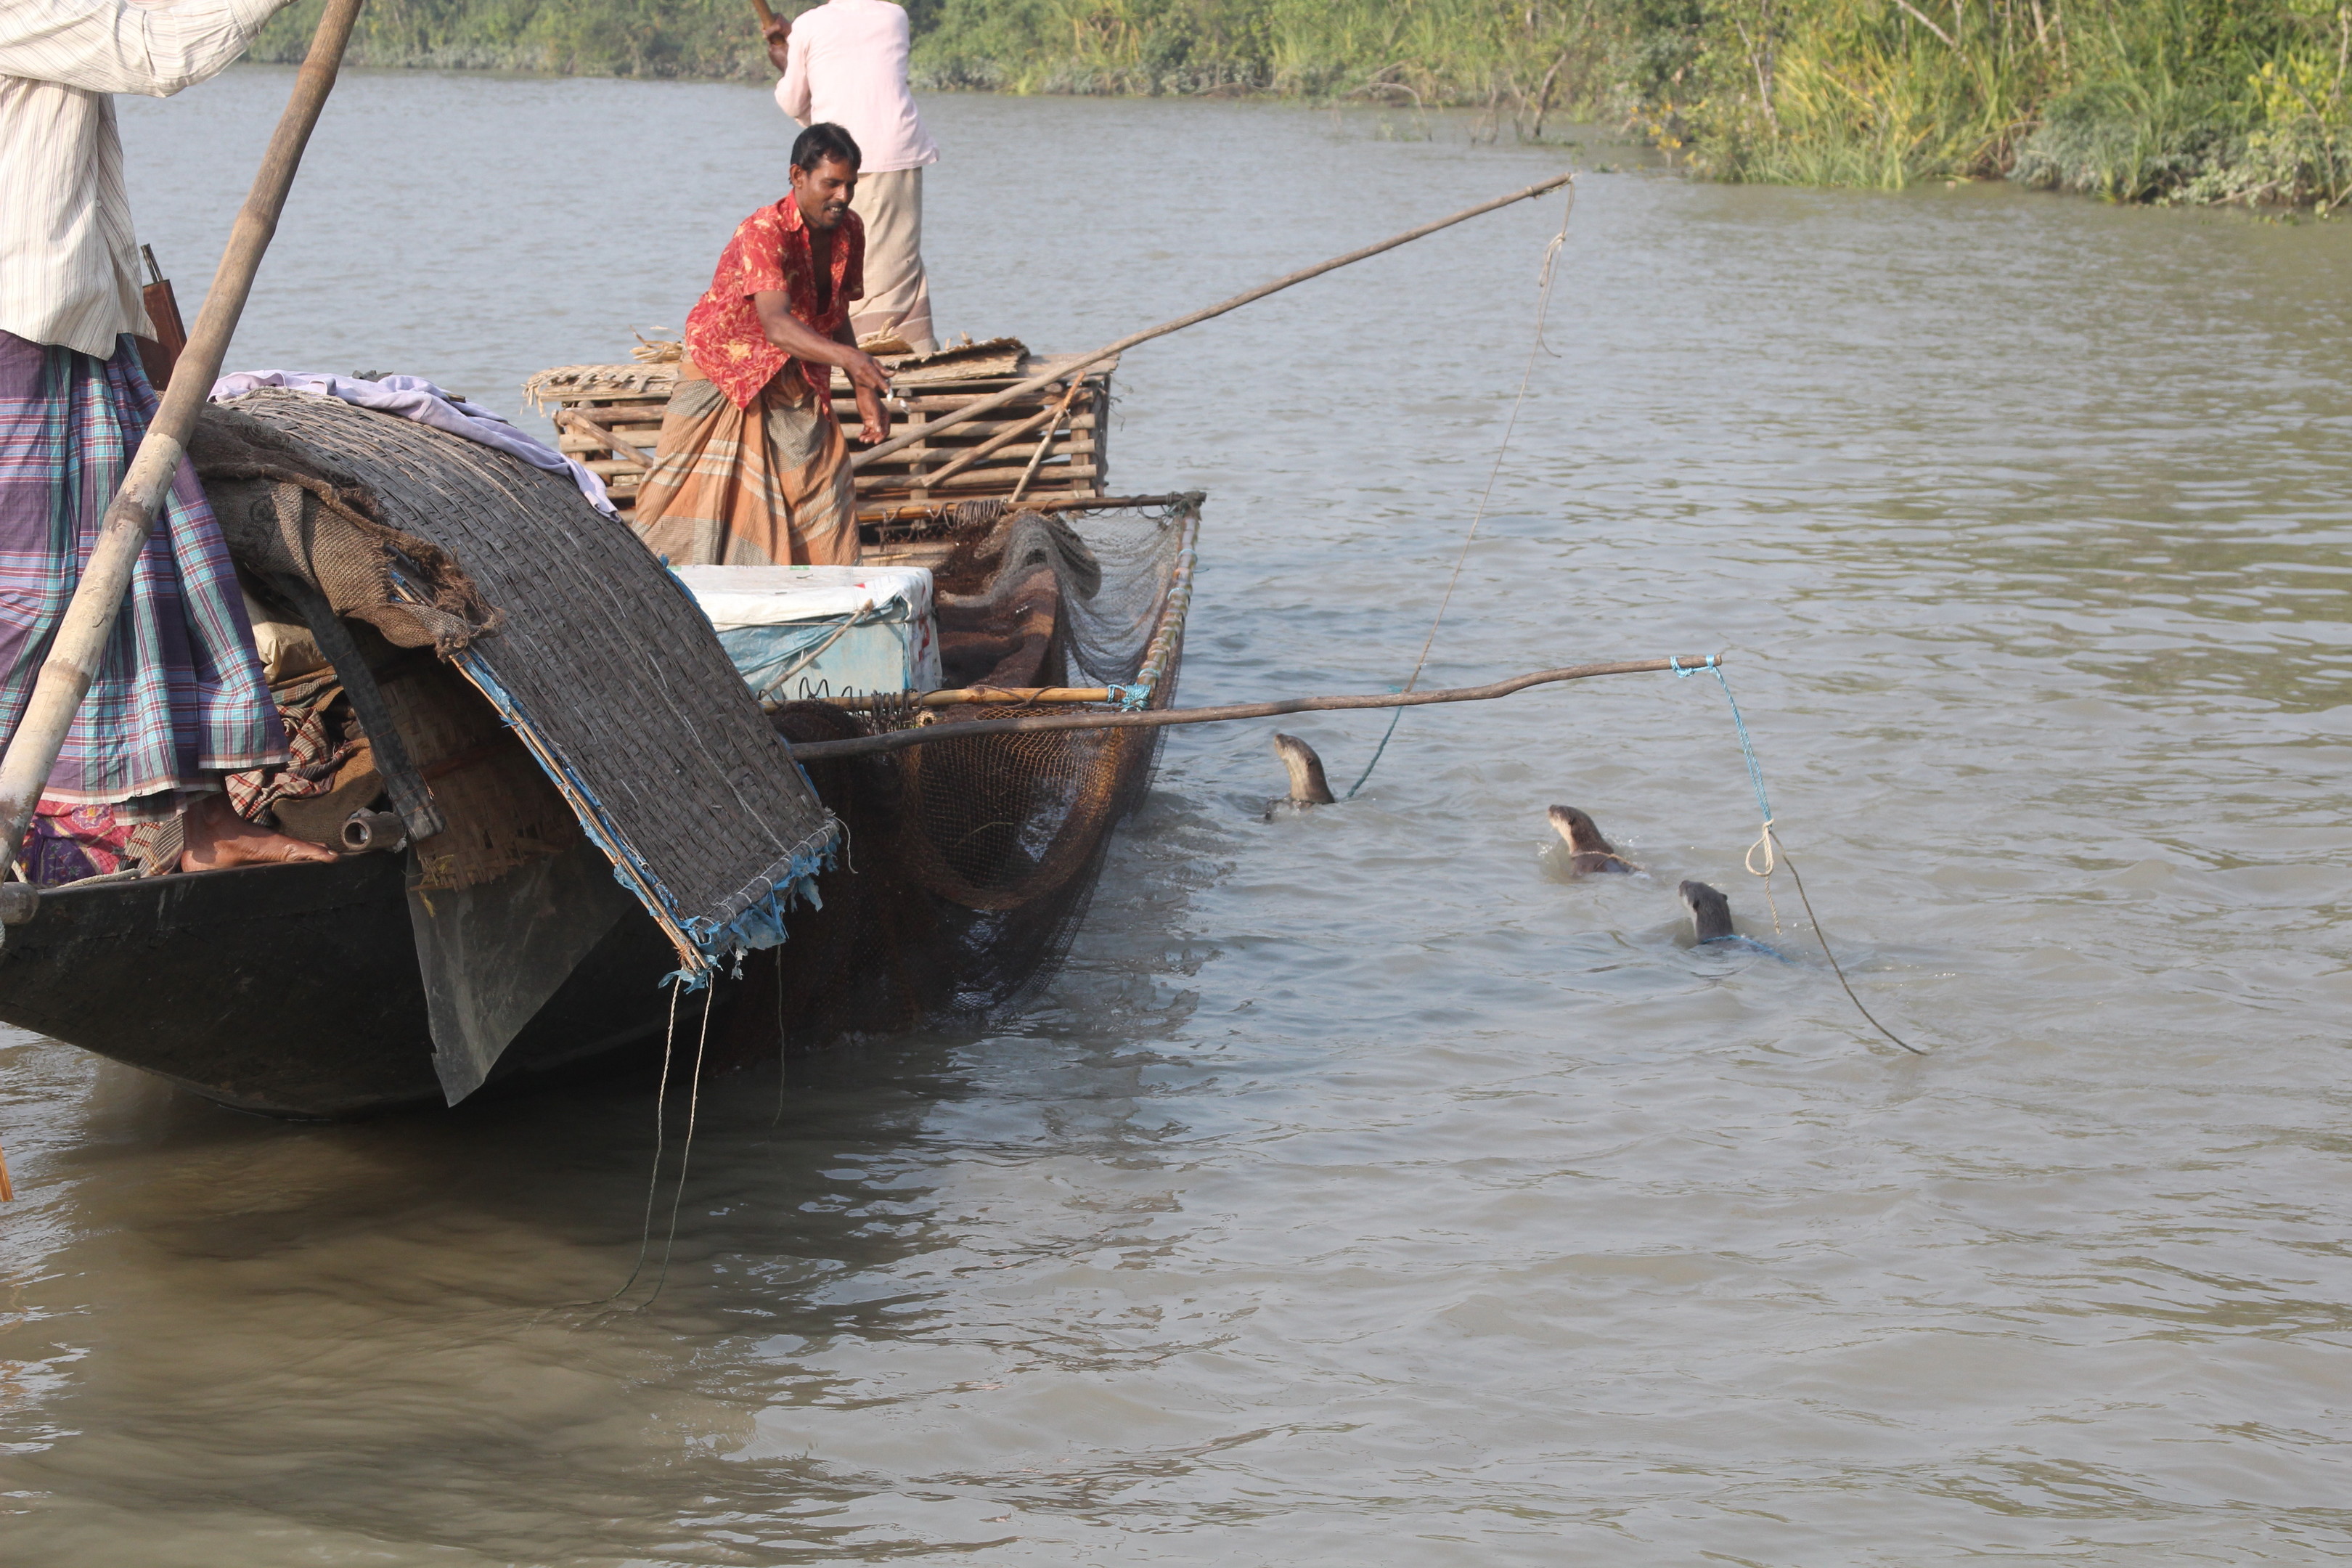 Otters being used for fishing in Bangladesh.